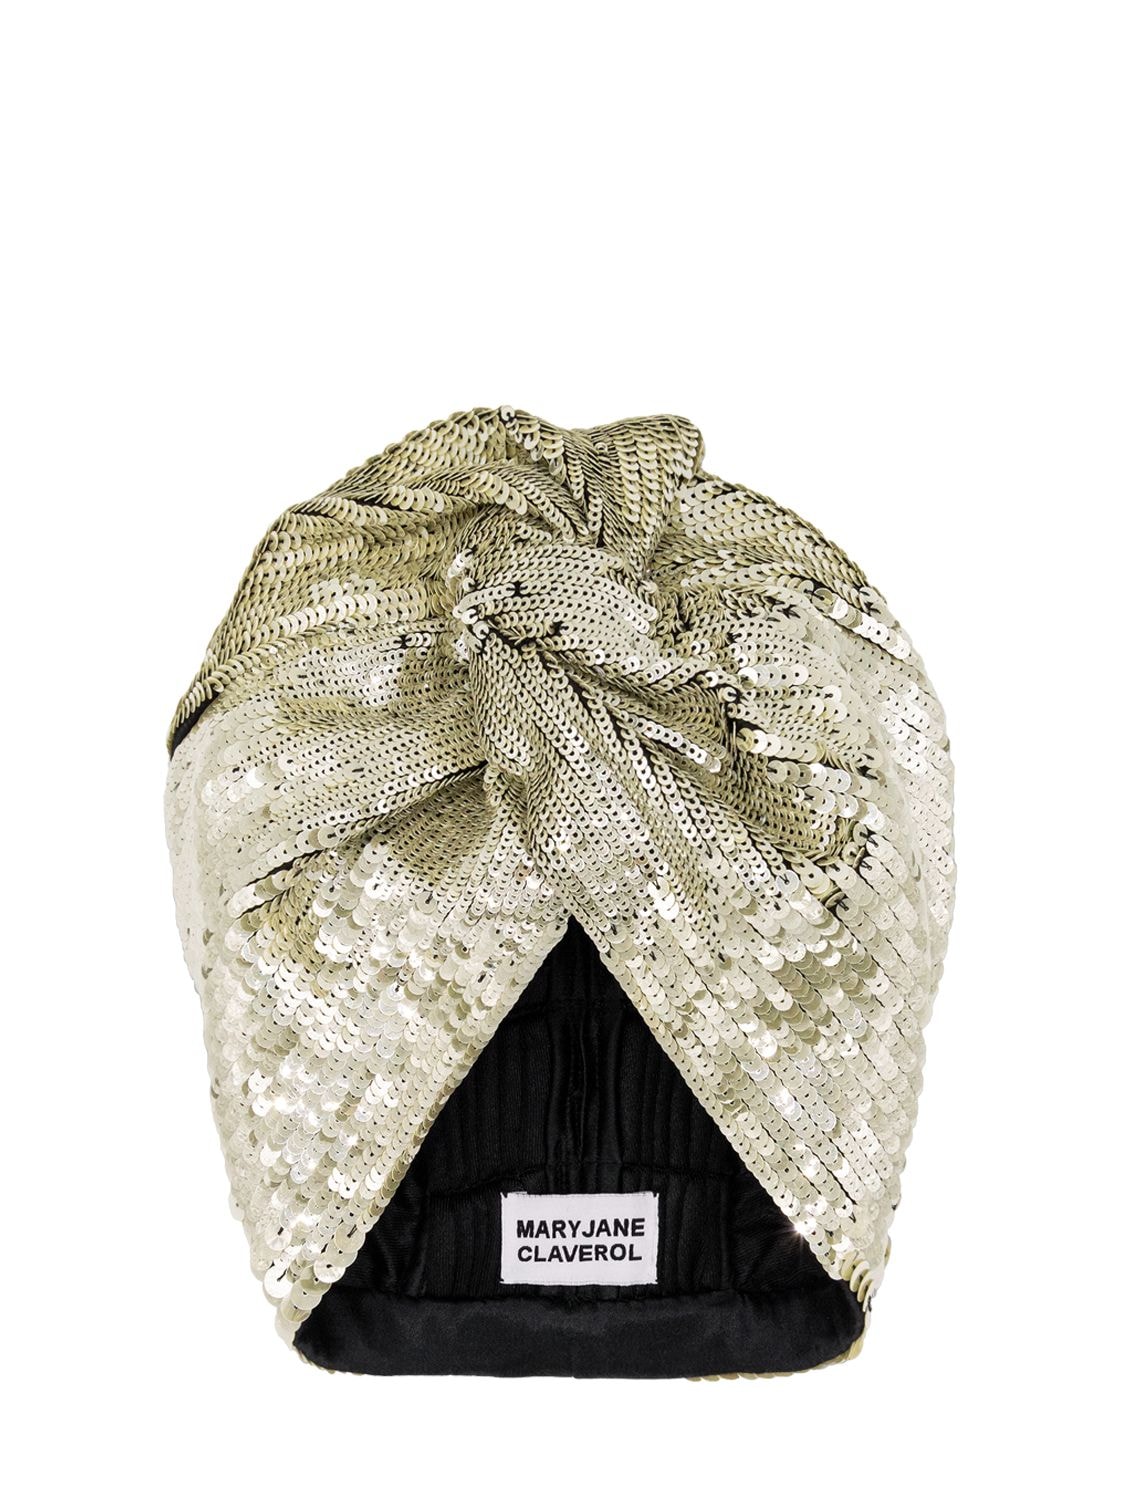 Mary Jane Claverol Adele Sequined Turban In Green